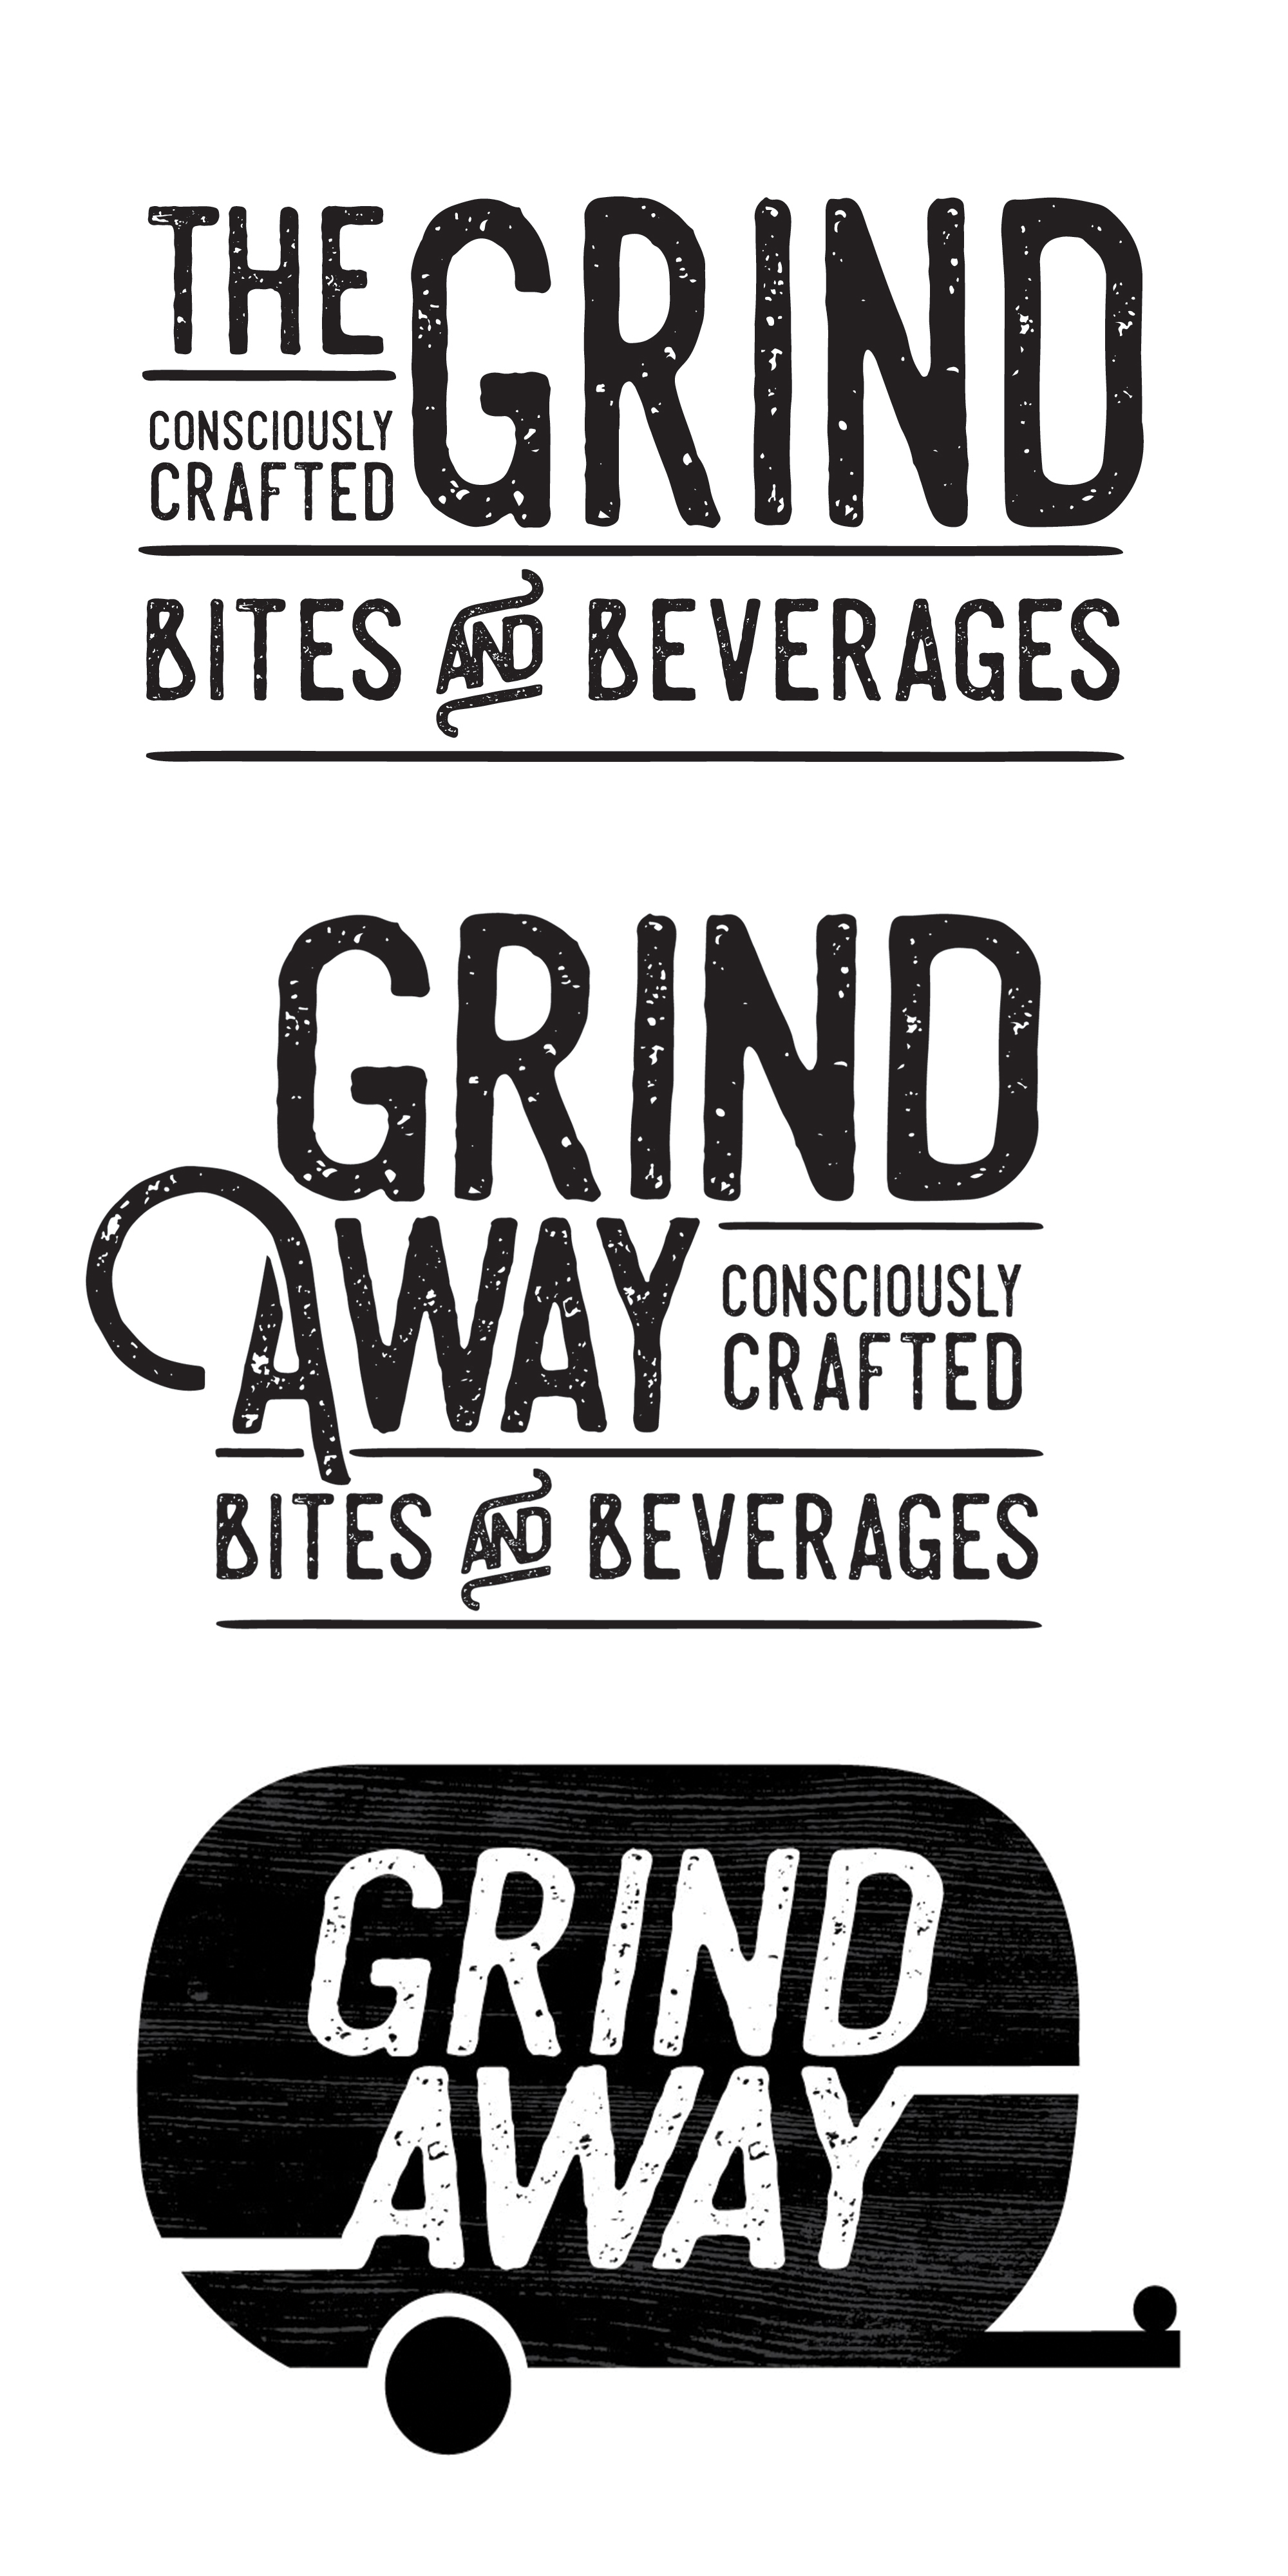 The Grind And Grind Away Logo Suite - designed by Wendy Wetherbee of Wetherbee Creative